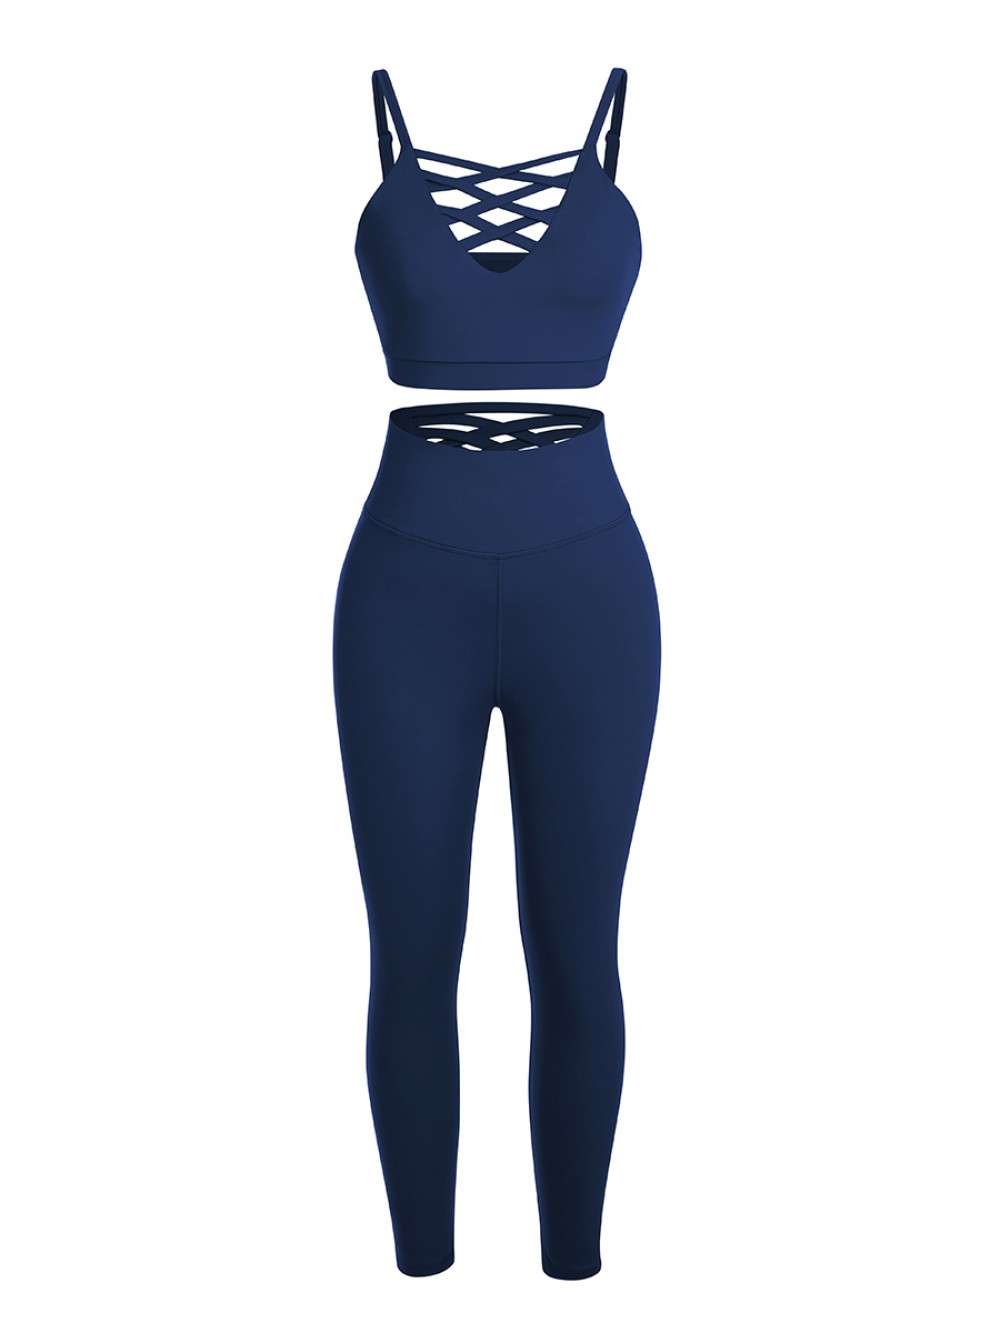 Navy Blue Lace-Up Pleated Gym Sets Full Length Delightful Garment